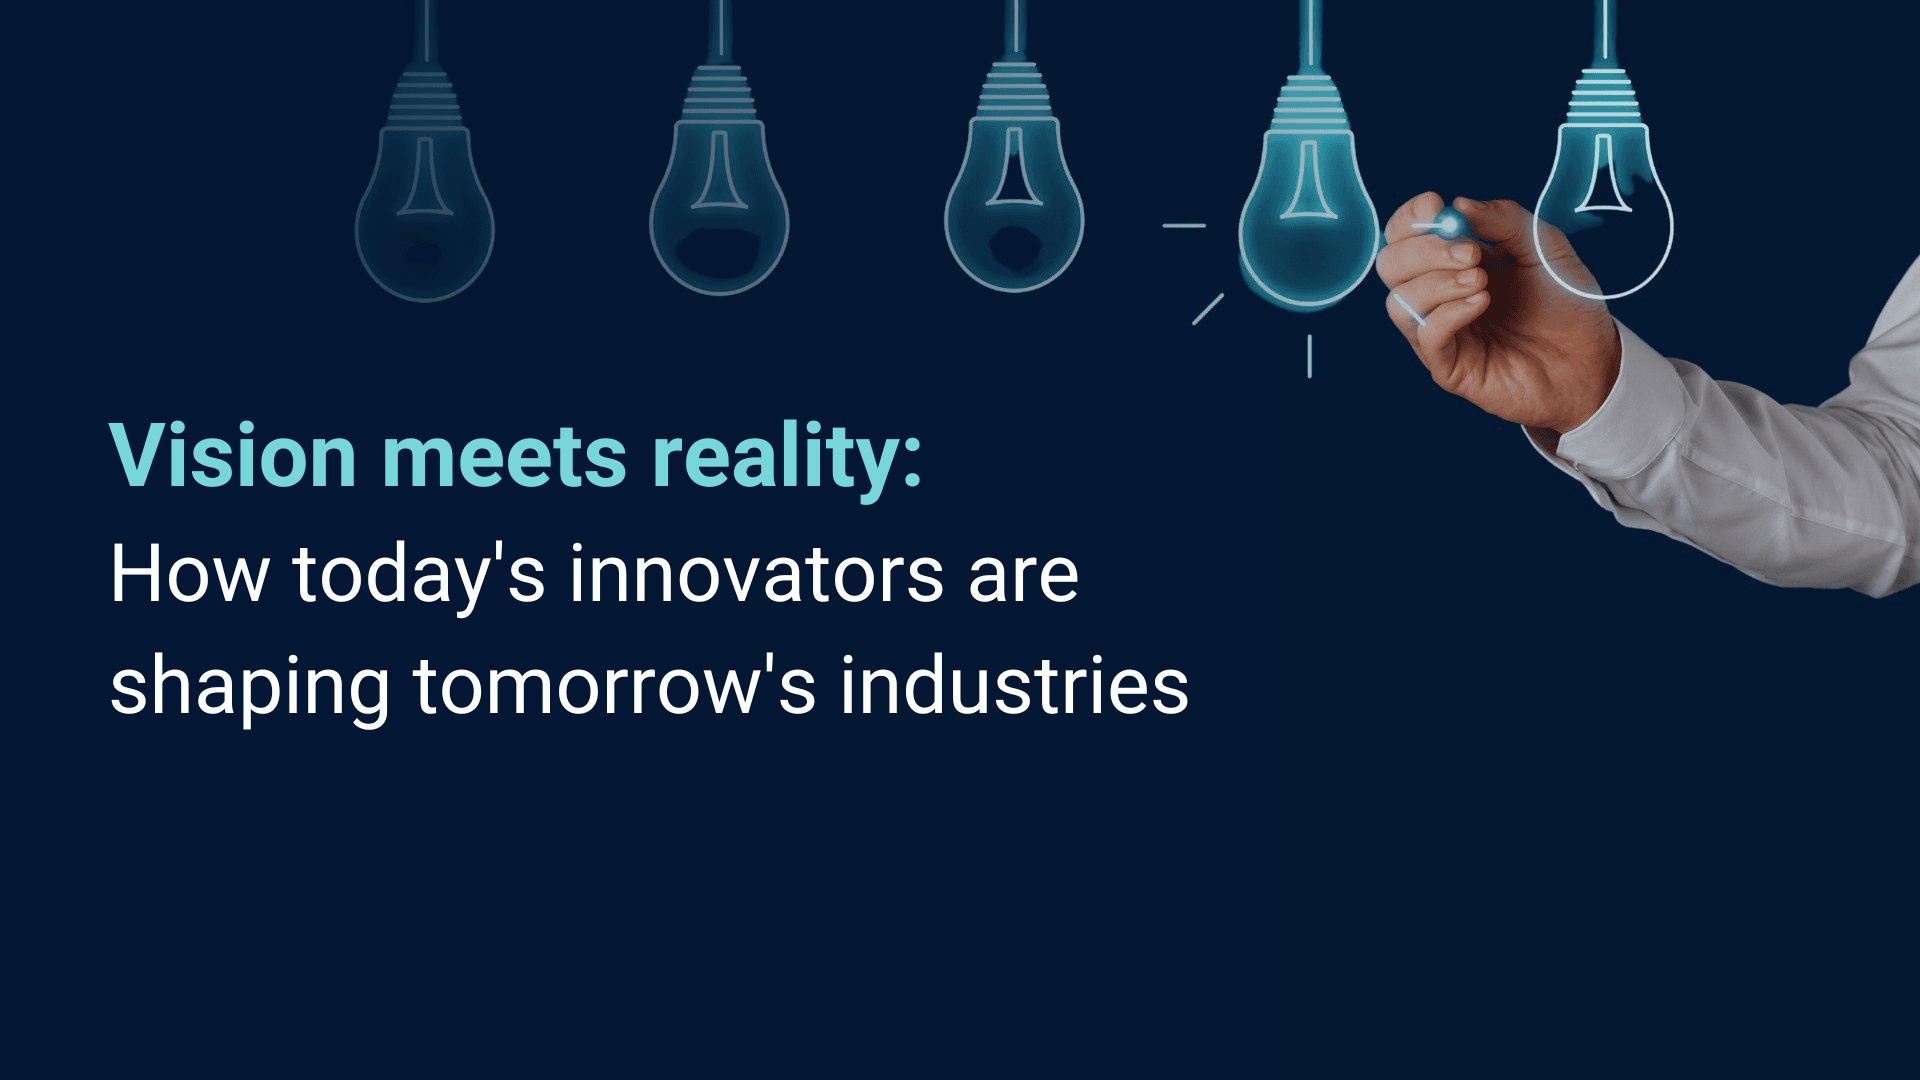 Vision meets reality: how today's innovators are shaping tomorrow's industries